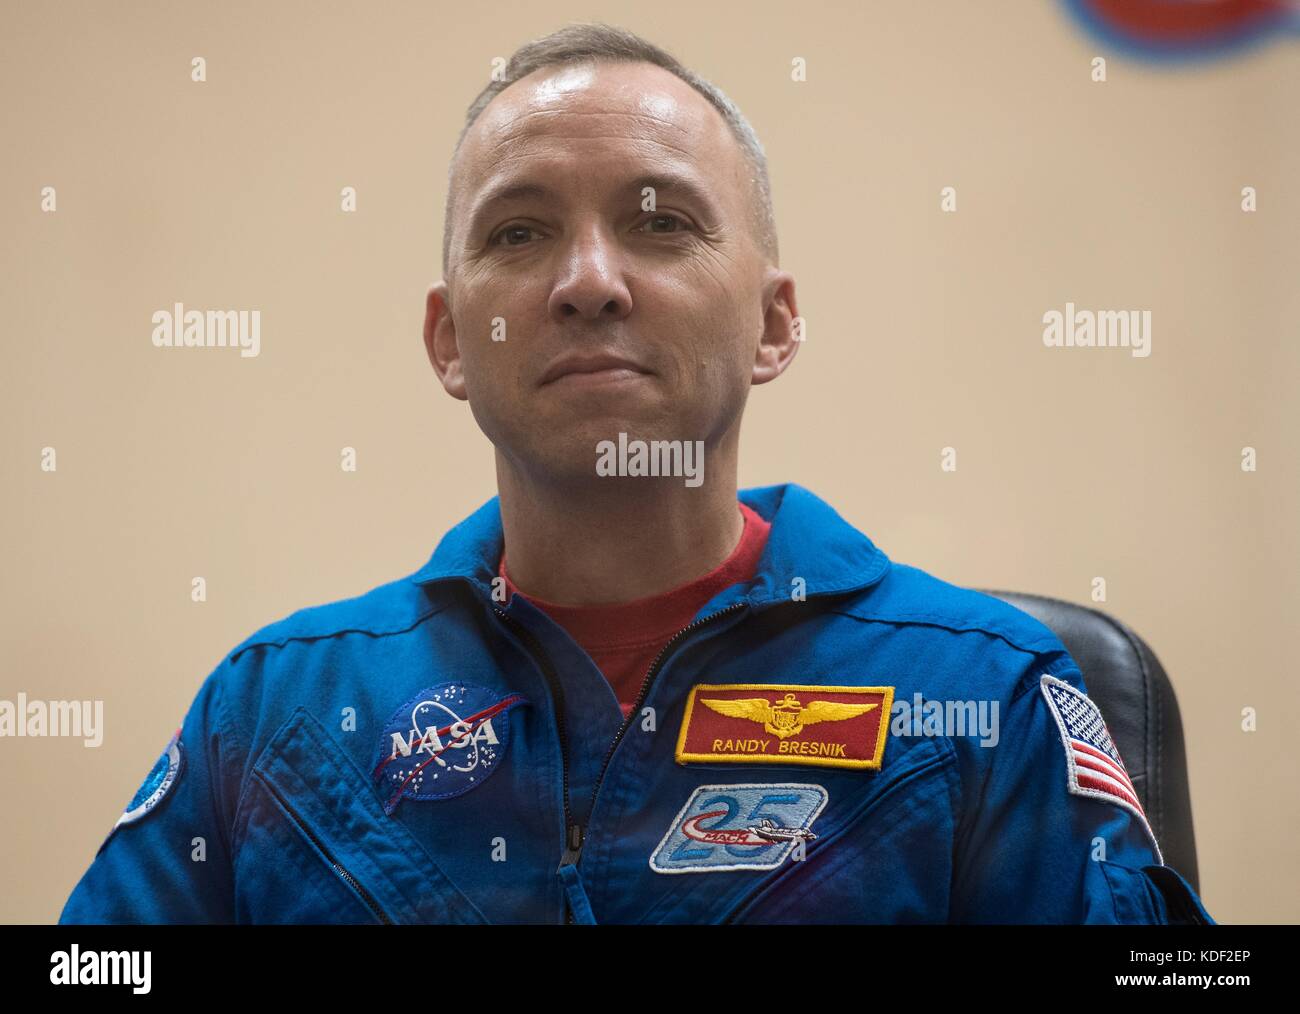 NASA International Space Station Expedition 52 Soyuz MS-05 prime crew member American astronaut Randy Bresnik attends a pre-launch press conference from behind quarantine glass at the Cosmonaut Hotel July 27, 2017 in Baikonur, Kazakhstan.   (photo by Joel Kowsky via Planetpix) Stock Photo